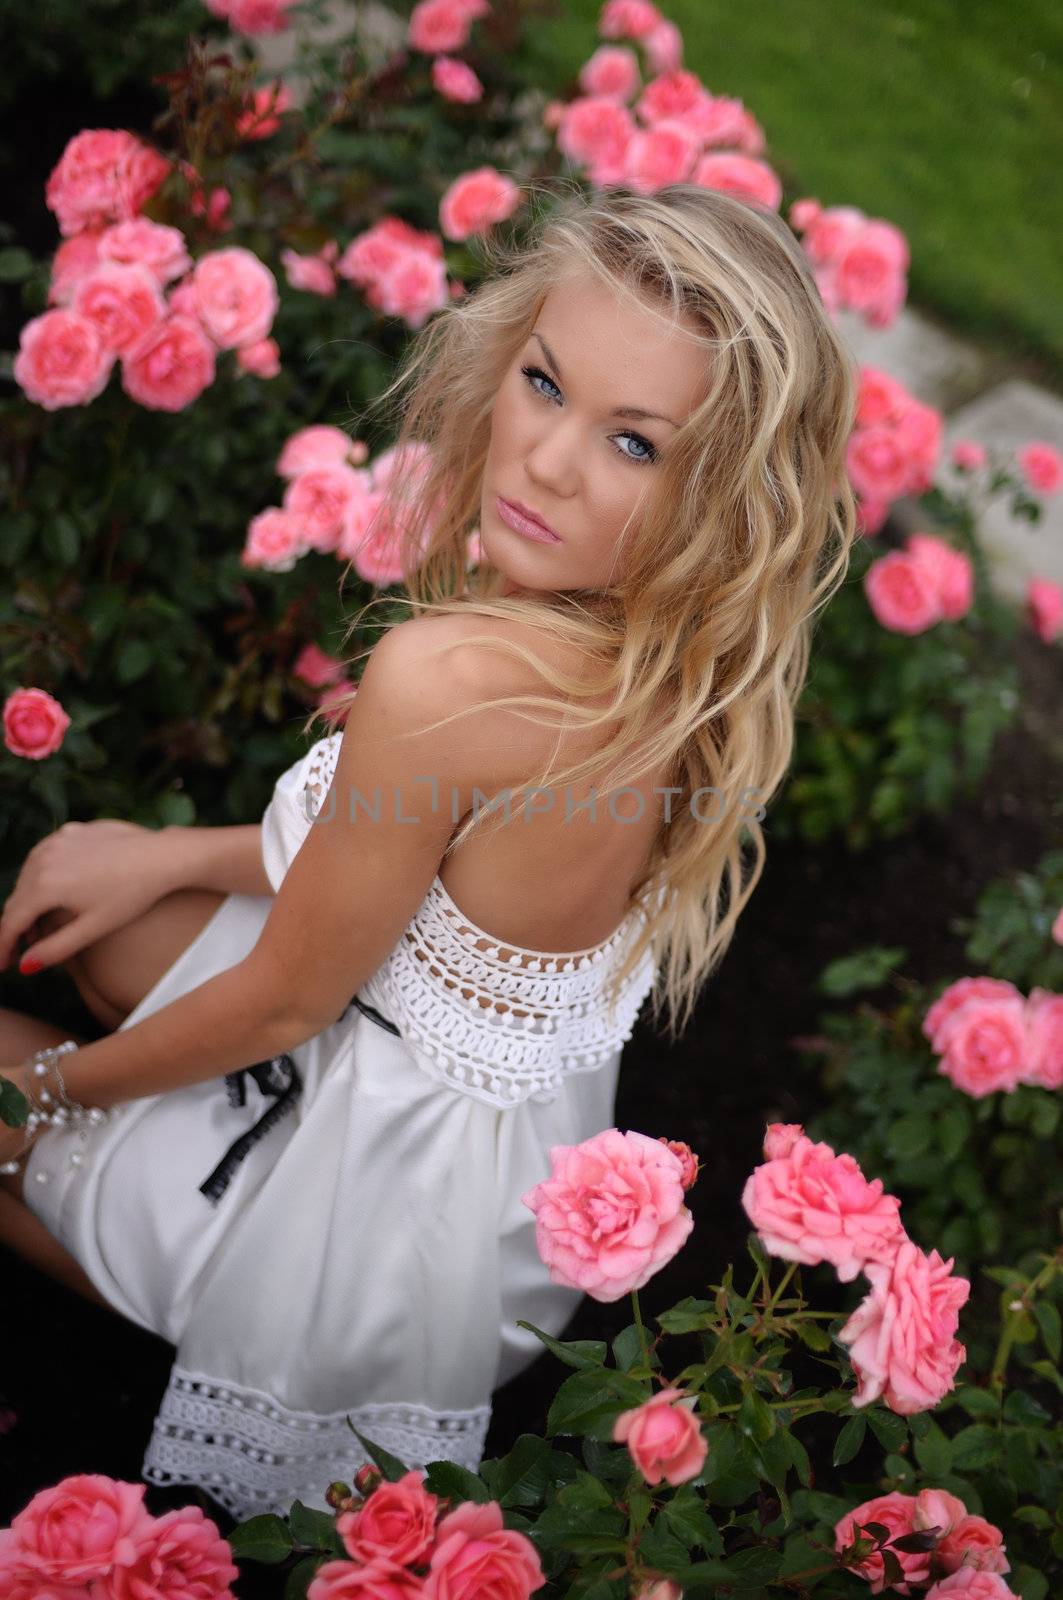 Smiing Blond In Pink Roses by peterveiler